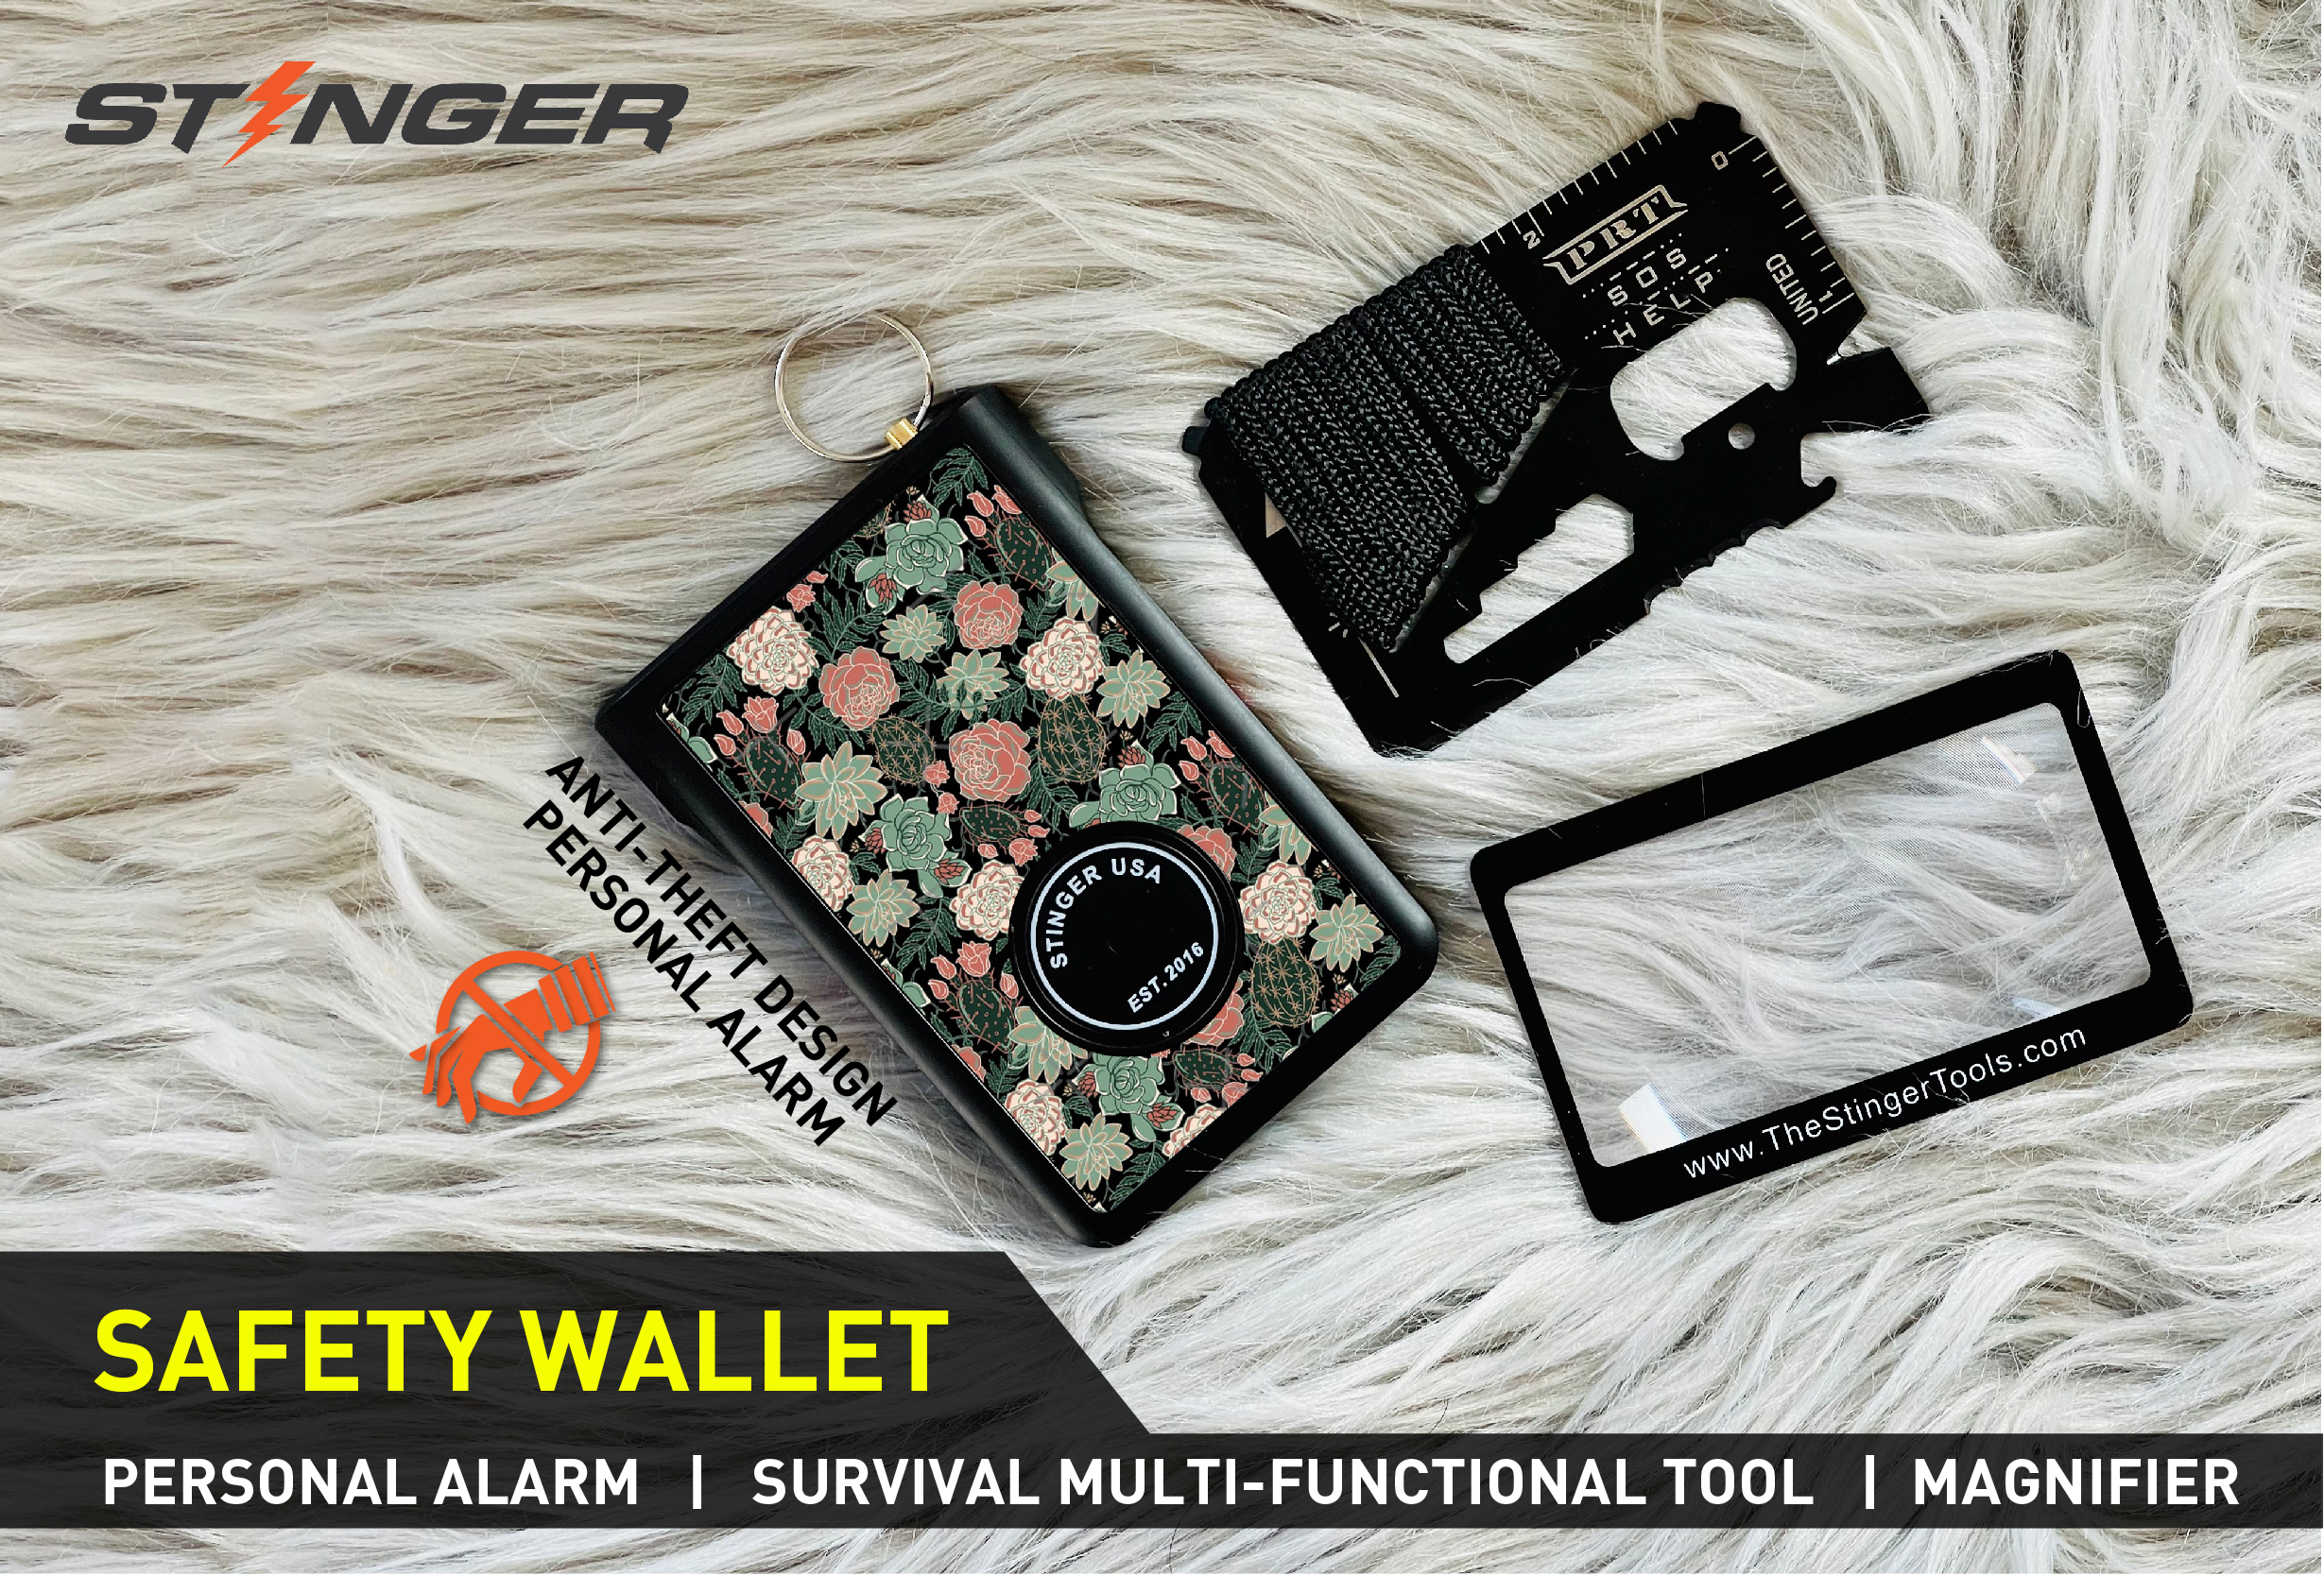 Stinger Safety Polymer Wallet with Personal Alarm Emergency Tool, Multi-functional Tool, and Magnifier, Original Design in USA